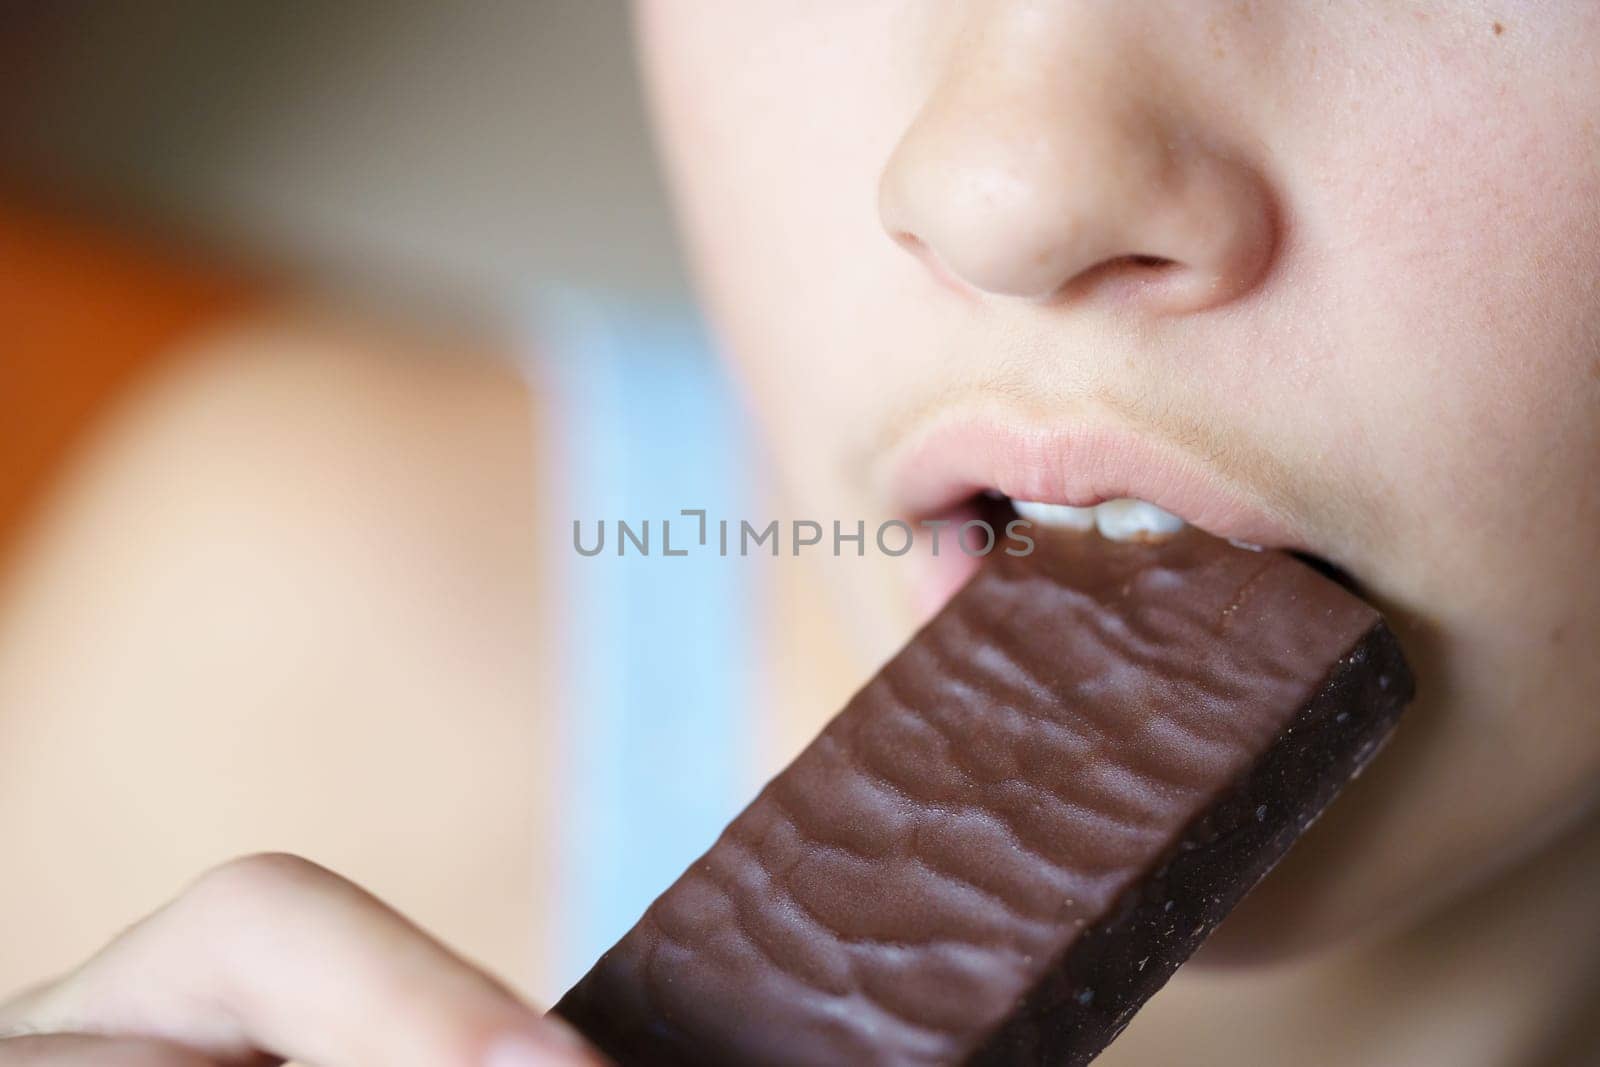 Crop anonymous teenage girl biting nutritious protein bar by javiindy